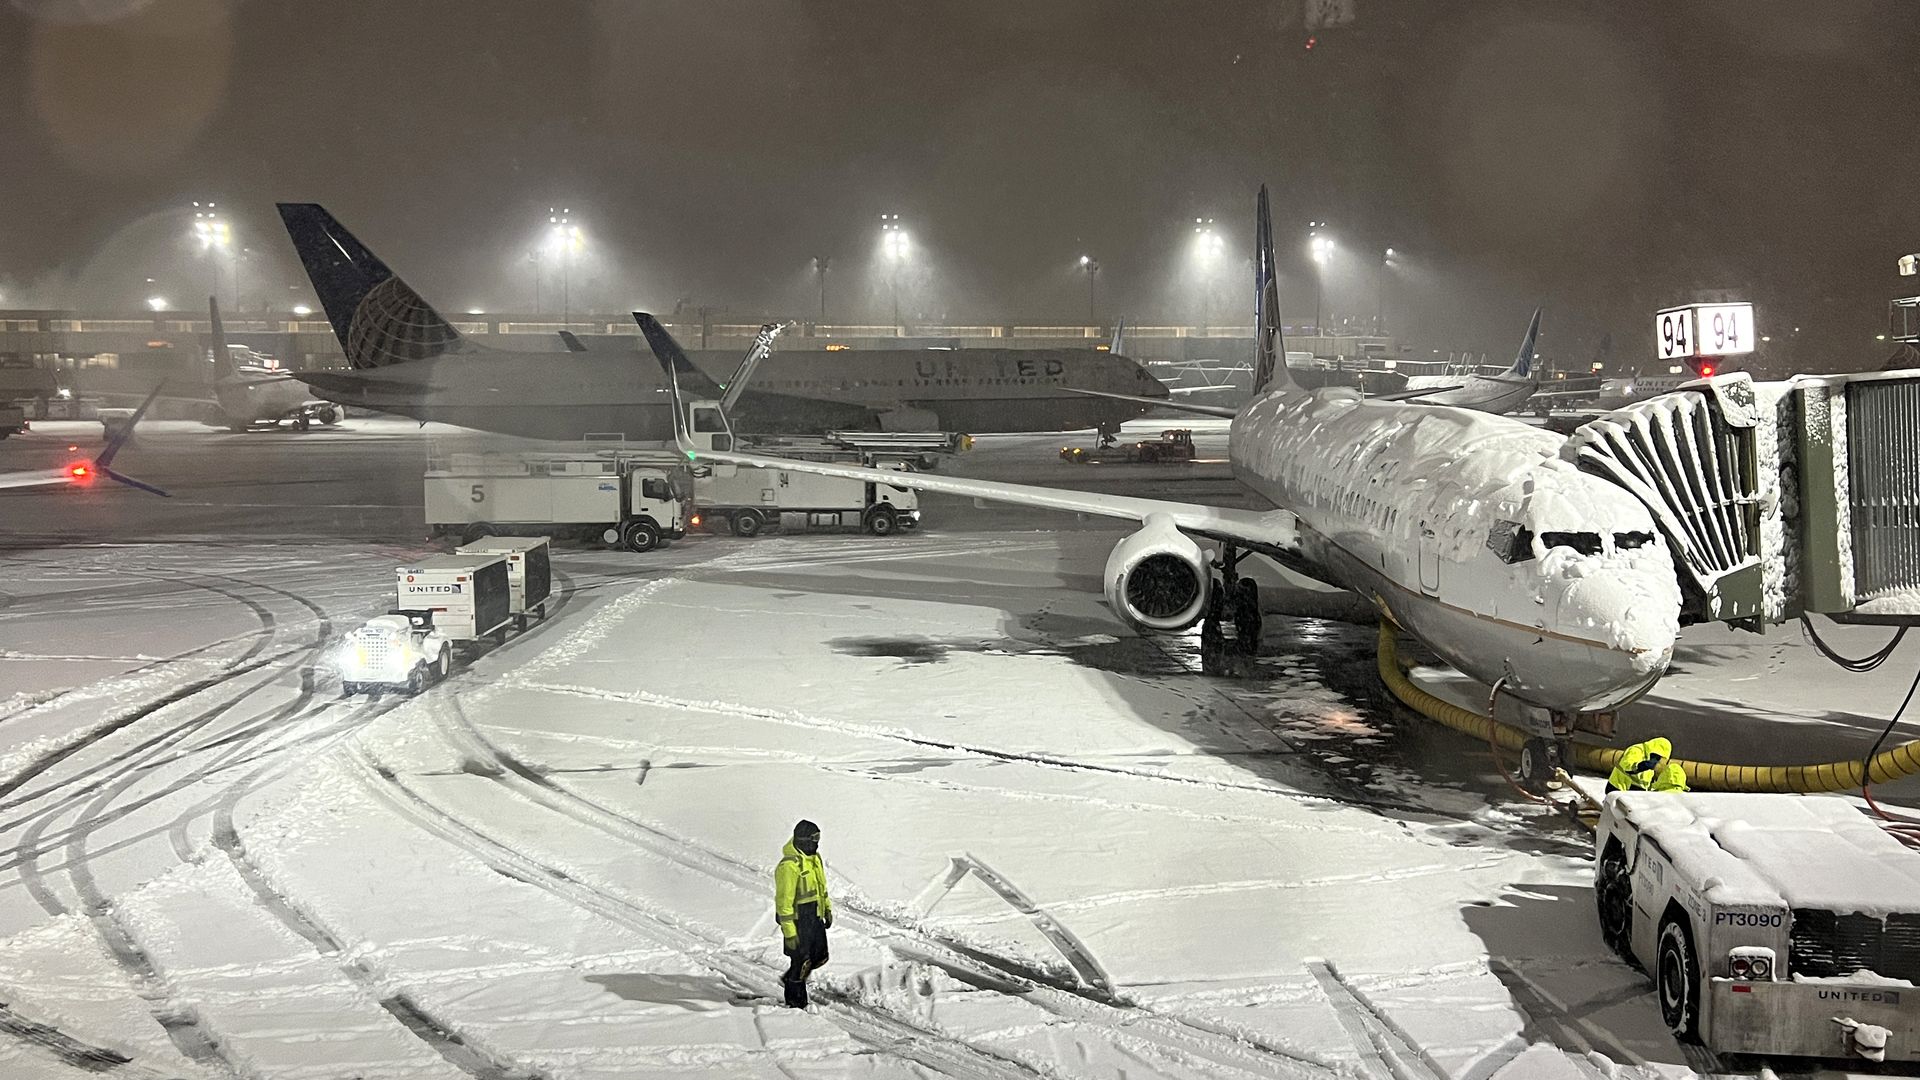  Airplane runway covered with snow at Newark Liberty International Airport on January 7, 2022 in New Jersey, United States as massive snow storm hits the east coast.